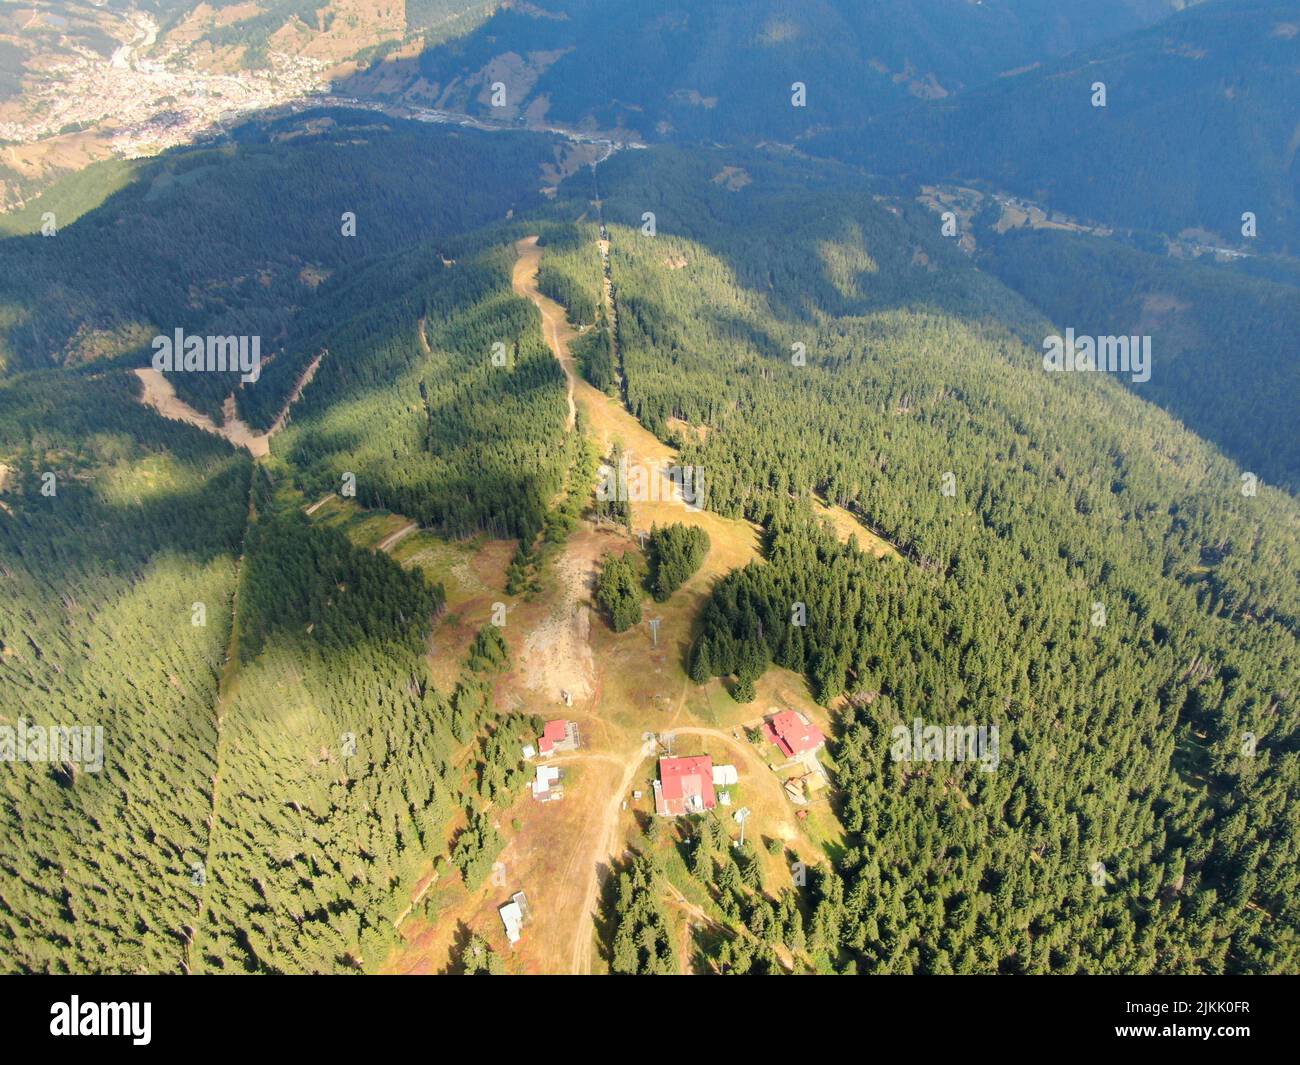 An aerial view of the Asenovgrad Bulgarian mountains and countryside Stock Photo